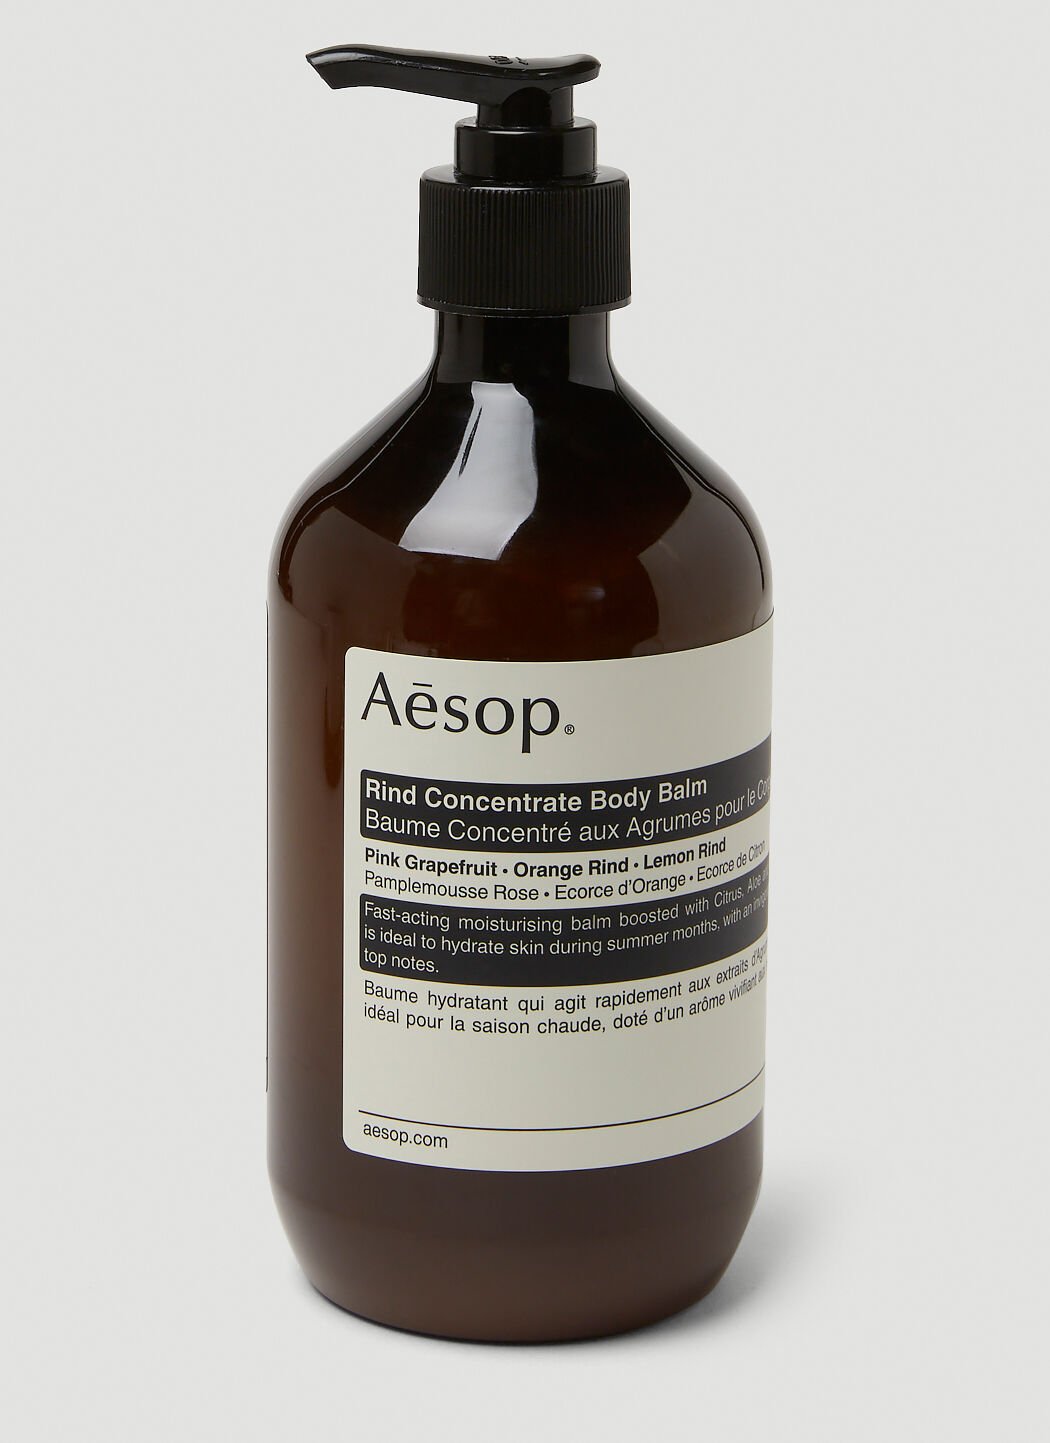 Aesop Rind Concentrate Body Balm Brown sop0349027